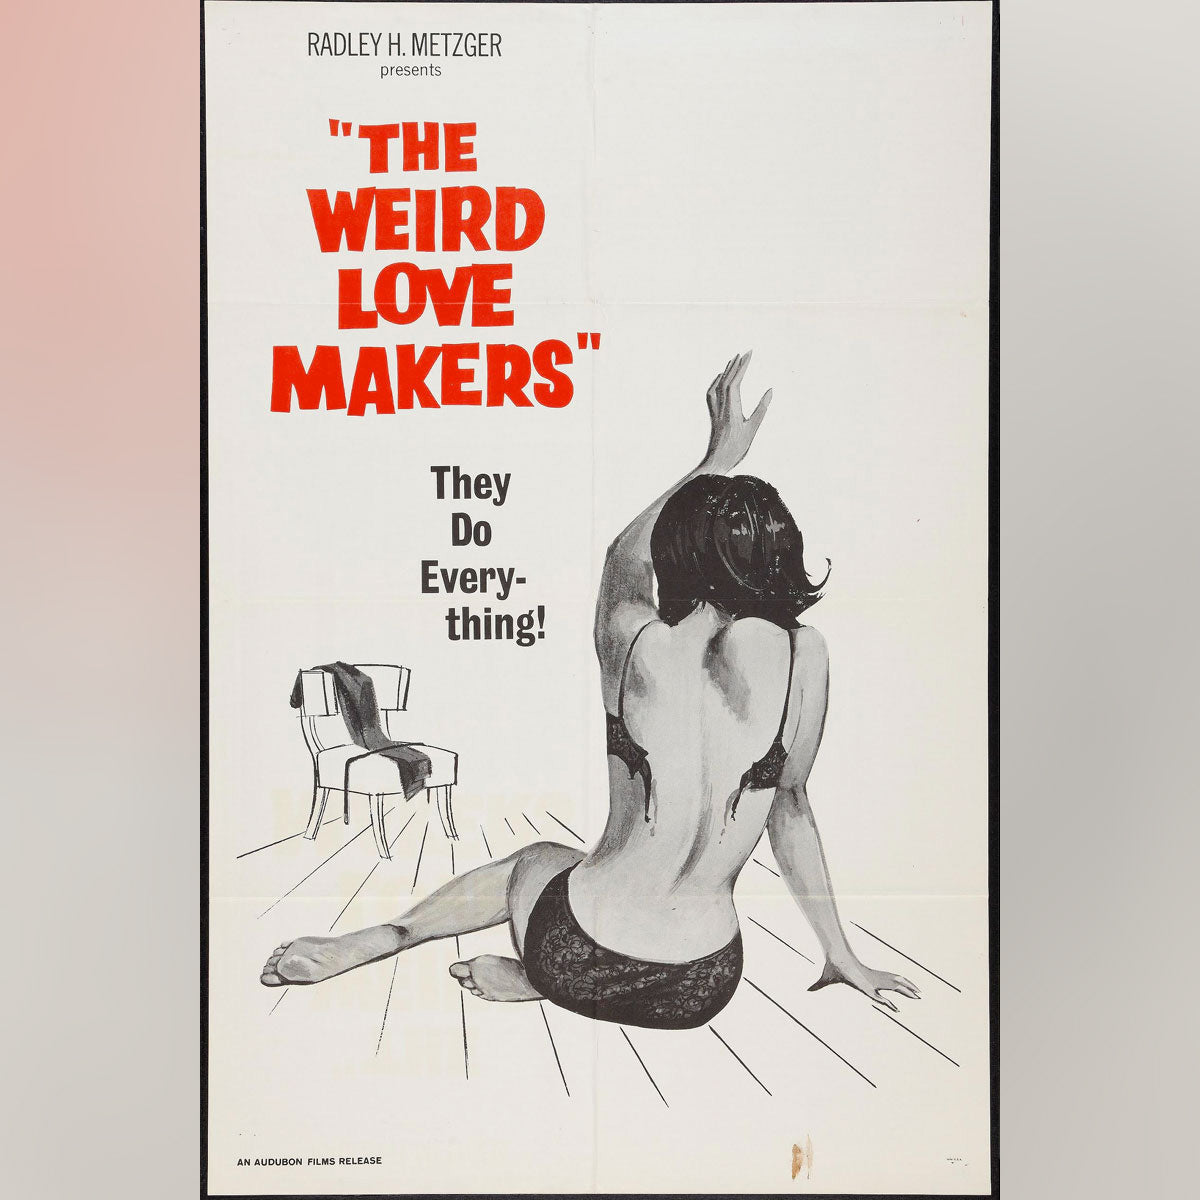 Original Movie Poster of Weird Love Makers, The (1960)